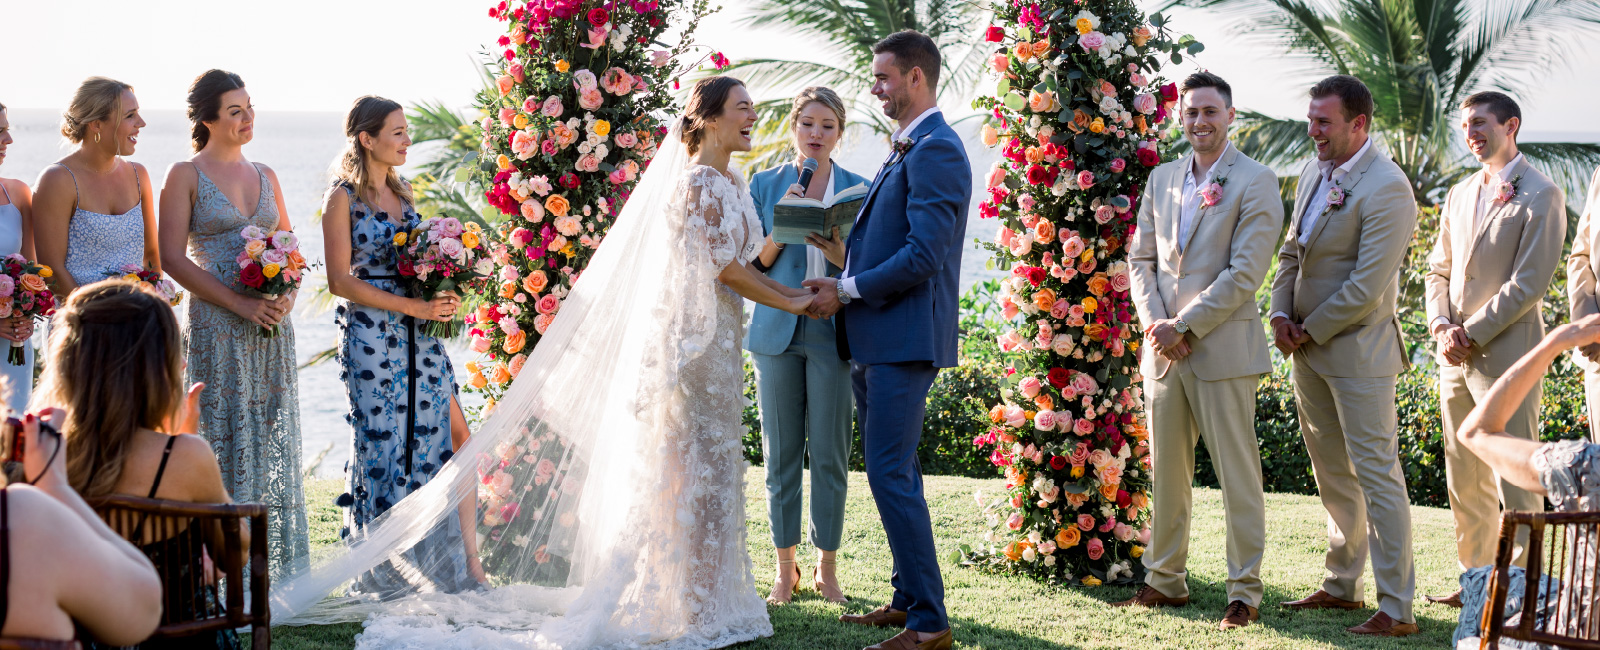 Bride and Groom getting married in front of a large colorful floral arch at their destination wedding in mexico